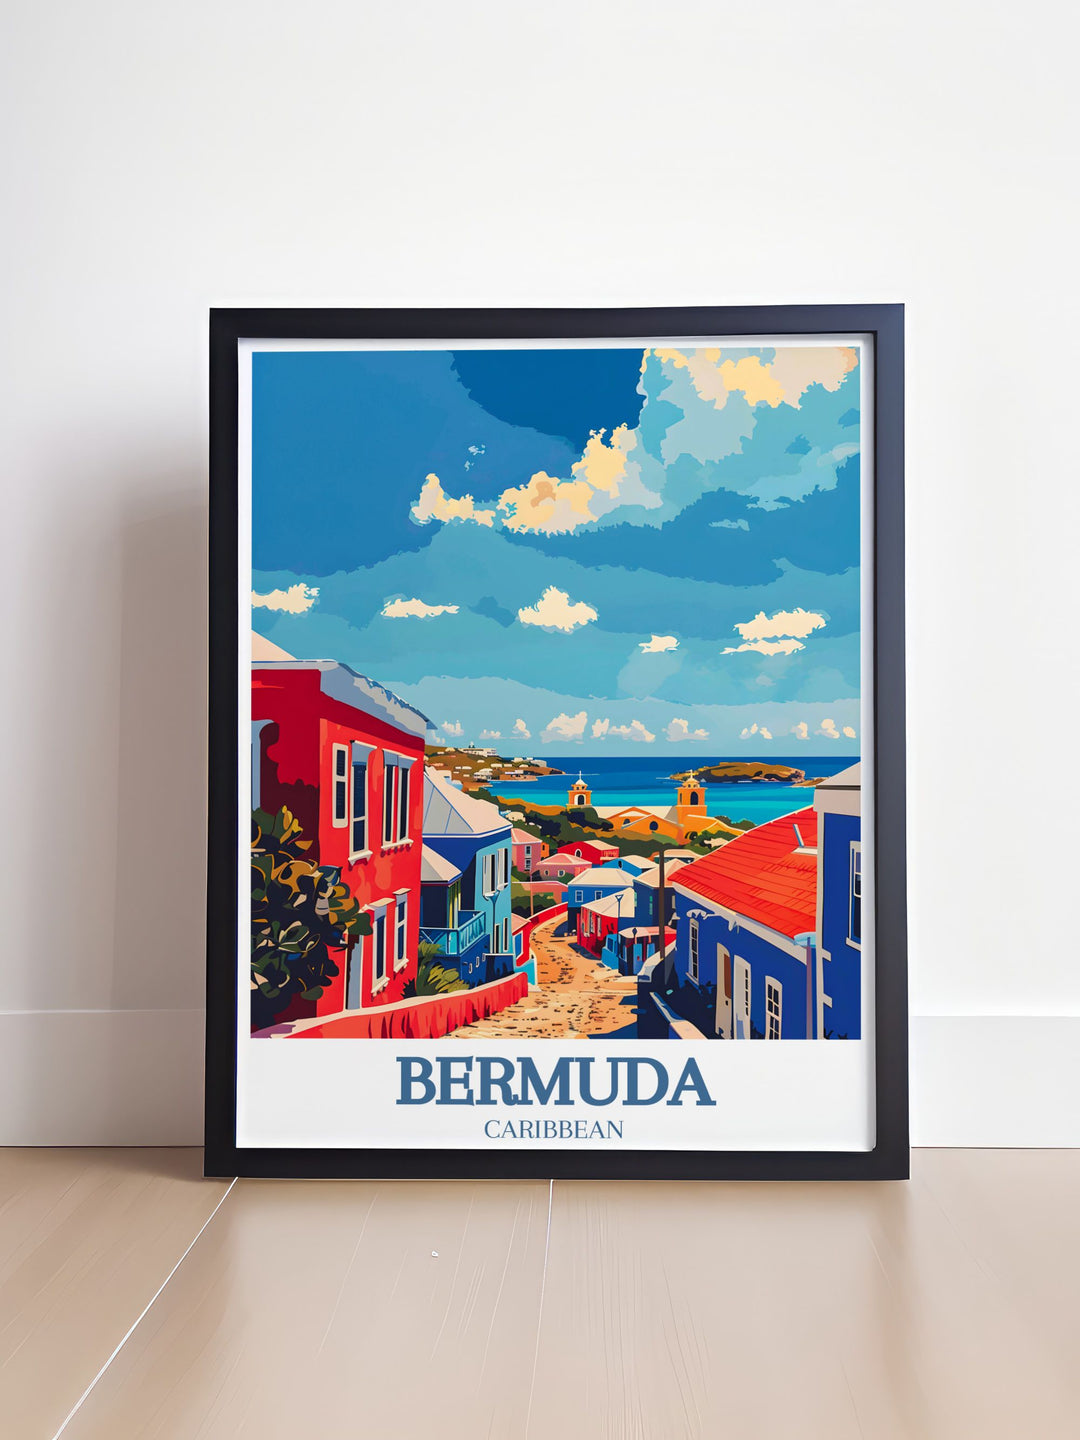 Beautiful Bermuda print highlighting the stunning architecture of the Royal Naval Dockyard and Clocktower Mall, ideal for history enthusiasts and travel art lovers. Adds a scenic and historic touch to your home decor.